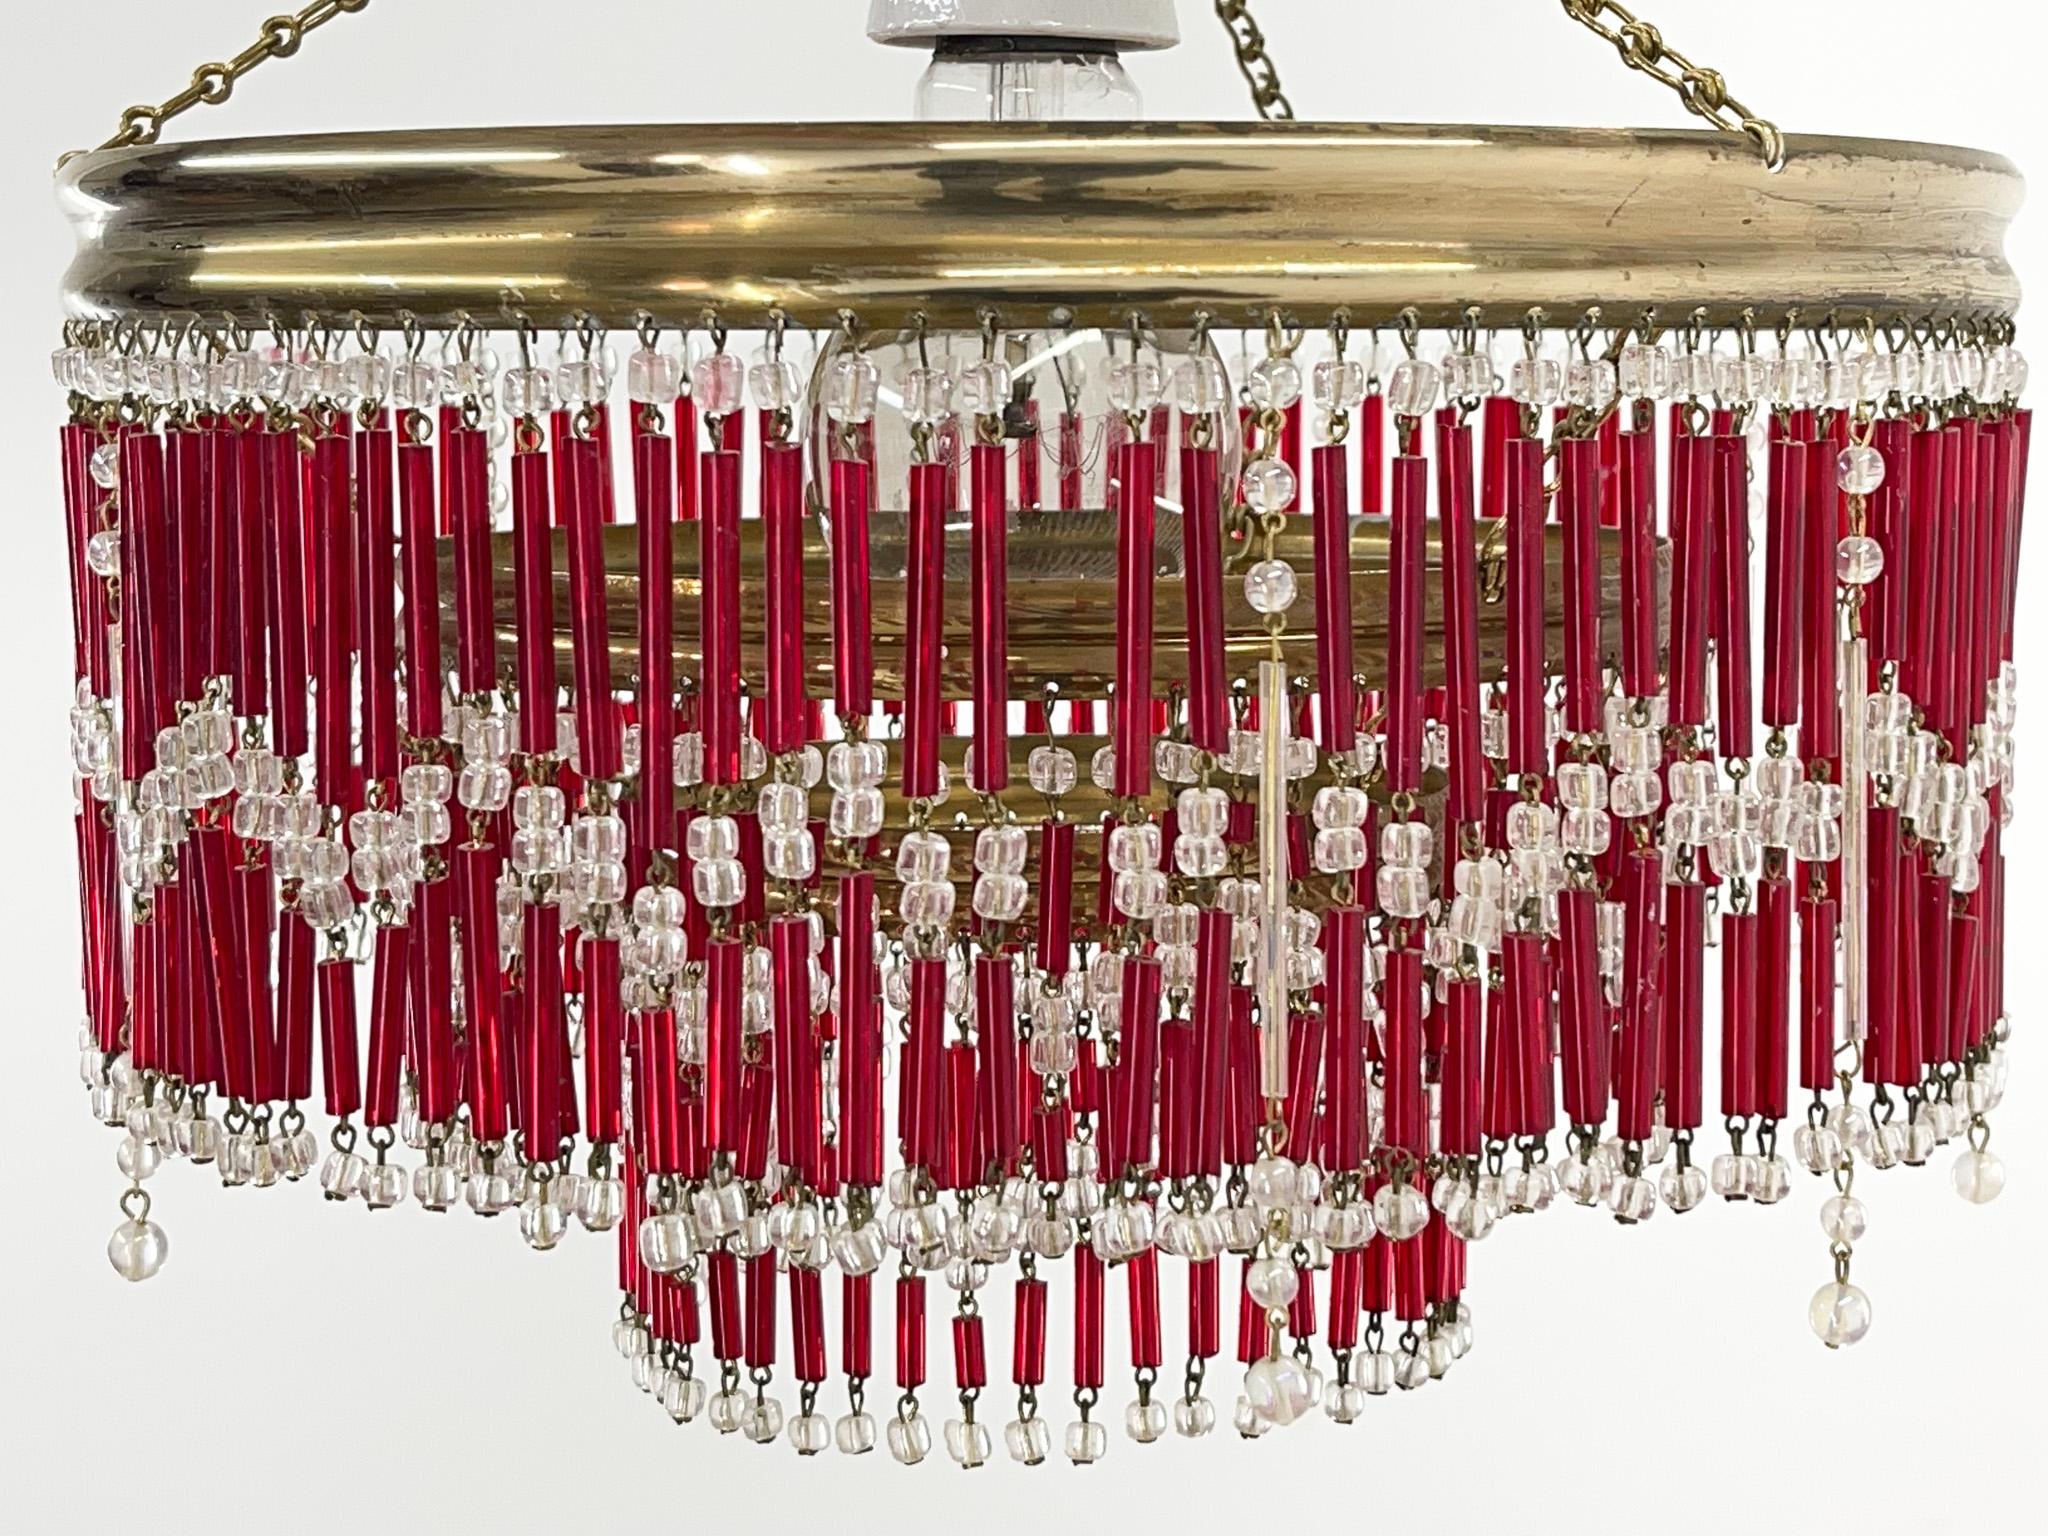 Midcentury Beaded Chandelier by Jablonec Glassworks, Czechoslovakia In Good Condition For Sale In Praha, CZ